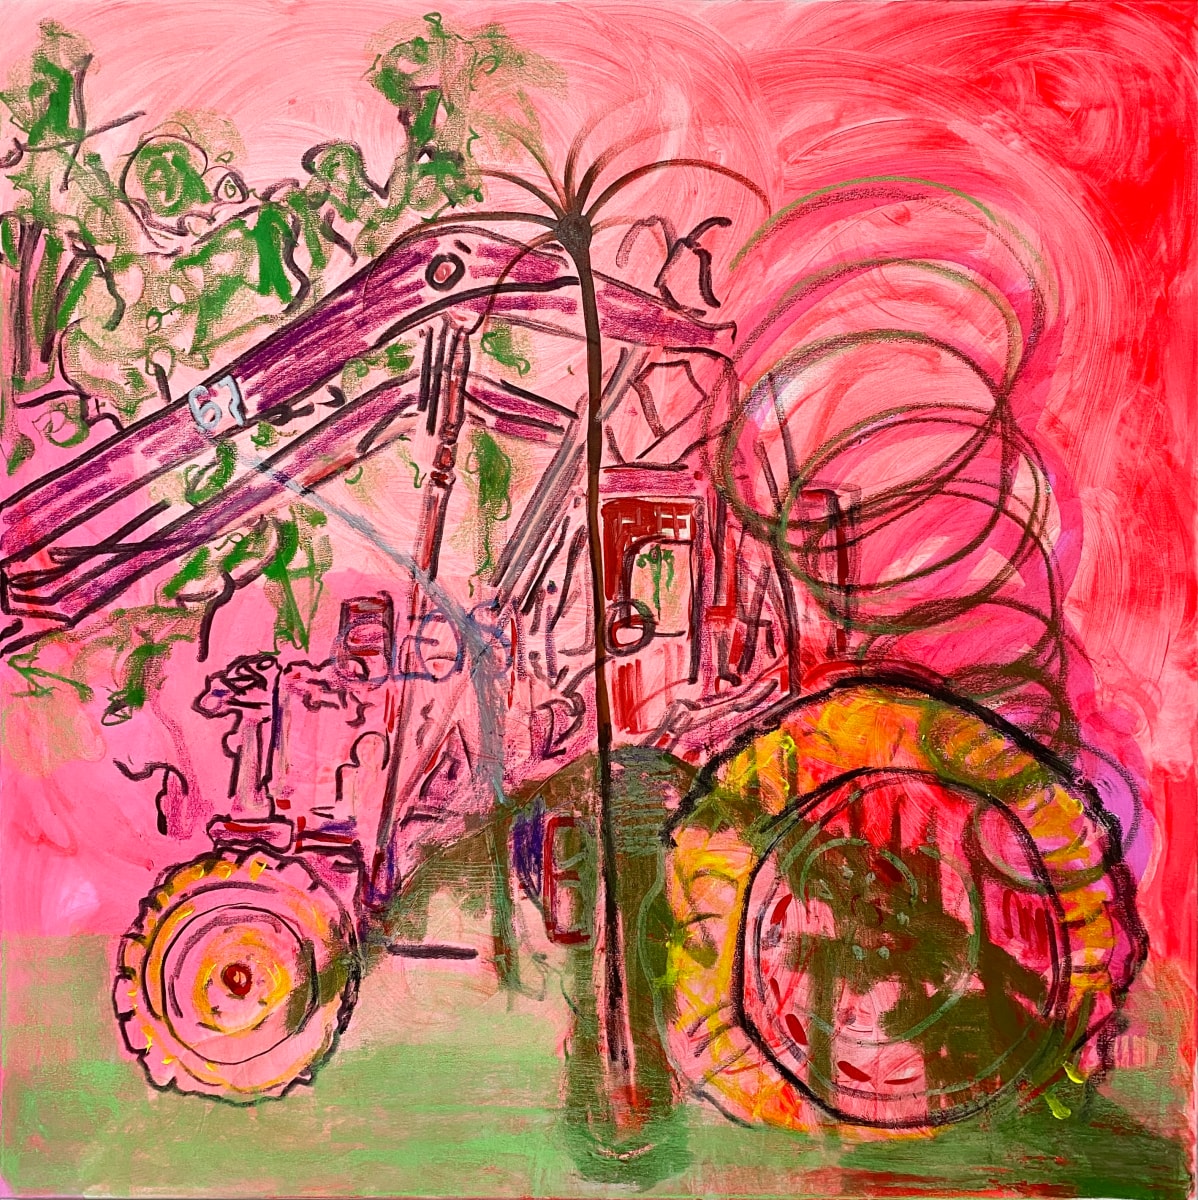 He Once Had A Shiny Red Tractor by Borg de Nobel 